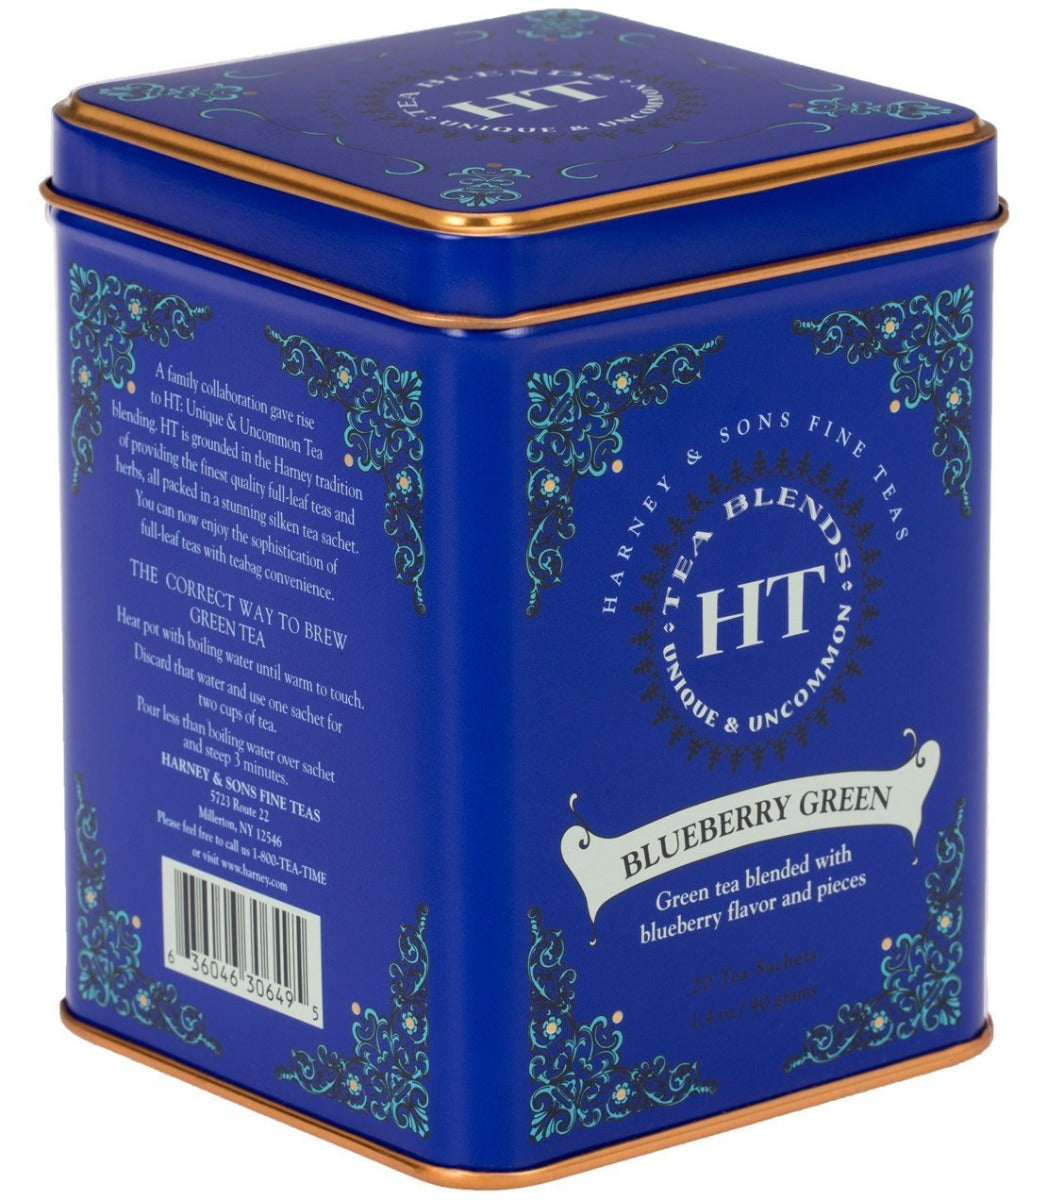 HARNEY & SONS: Blueberry Green Tea, 20 pc - Vending Business Solutions